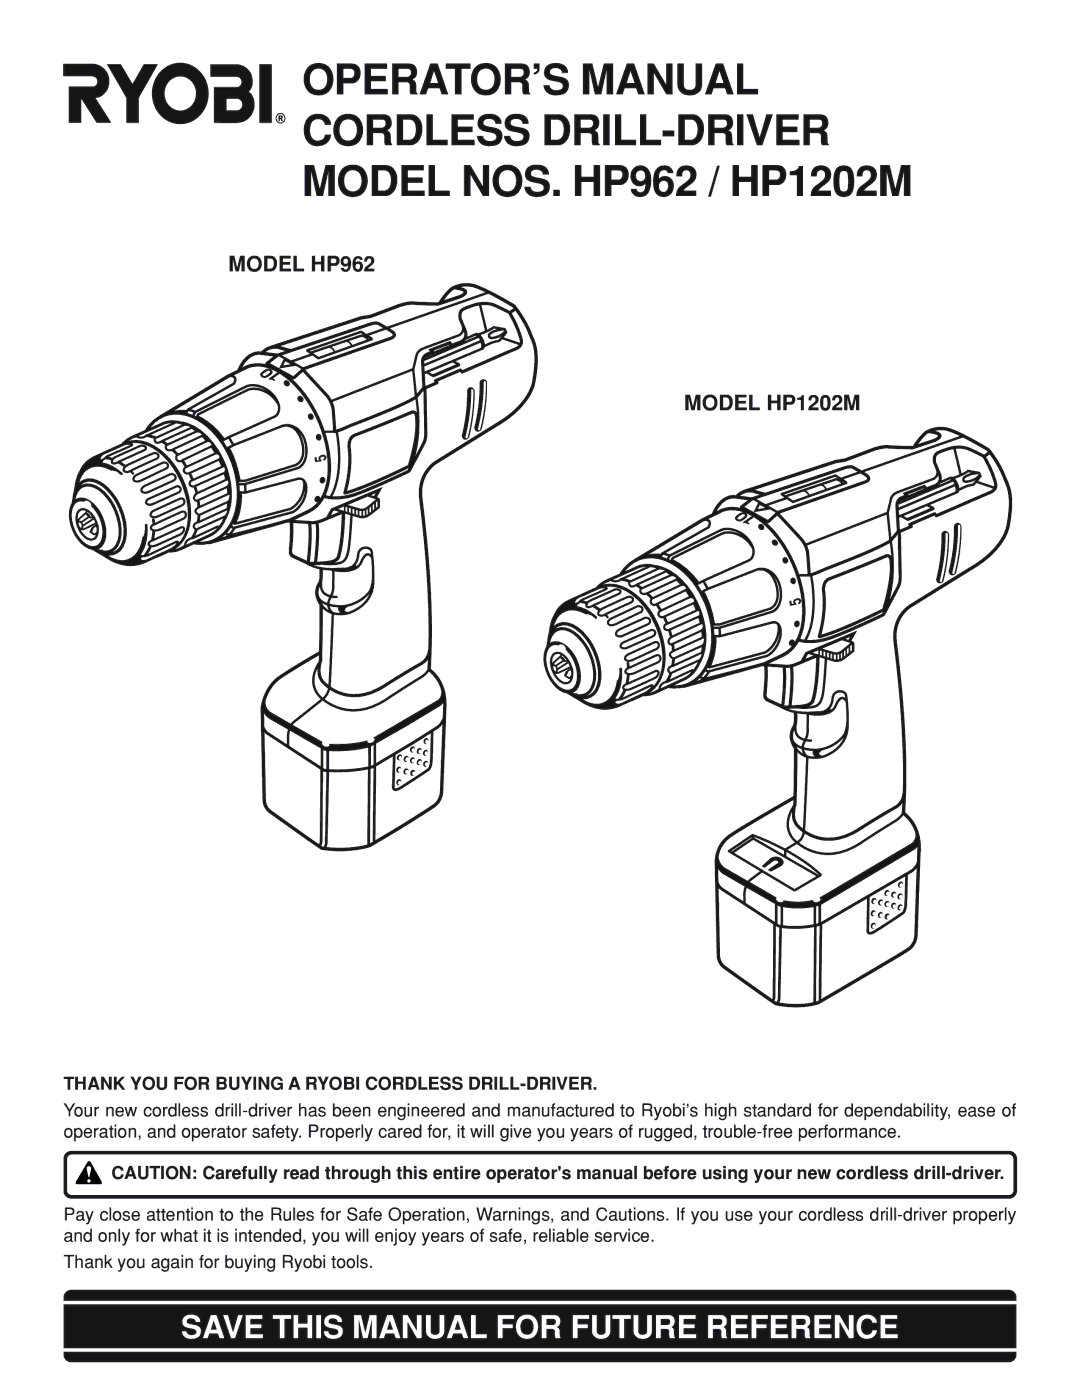 Ryobi manual Save this Manual for Future Reference, Model HP962 Model HP1202M 